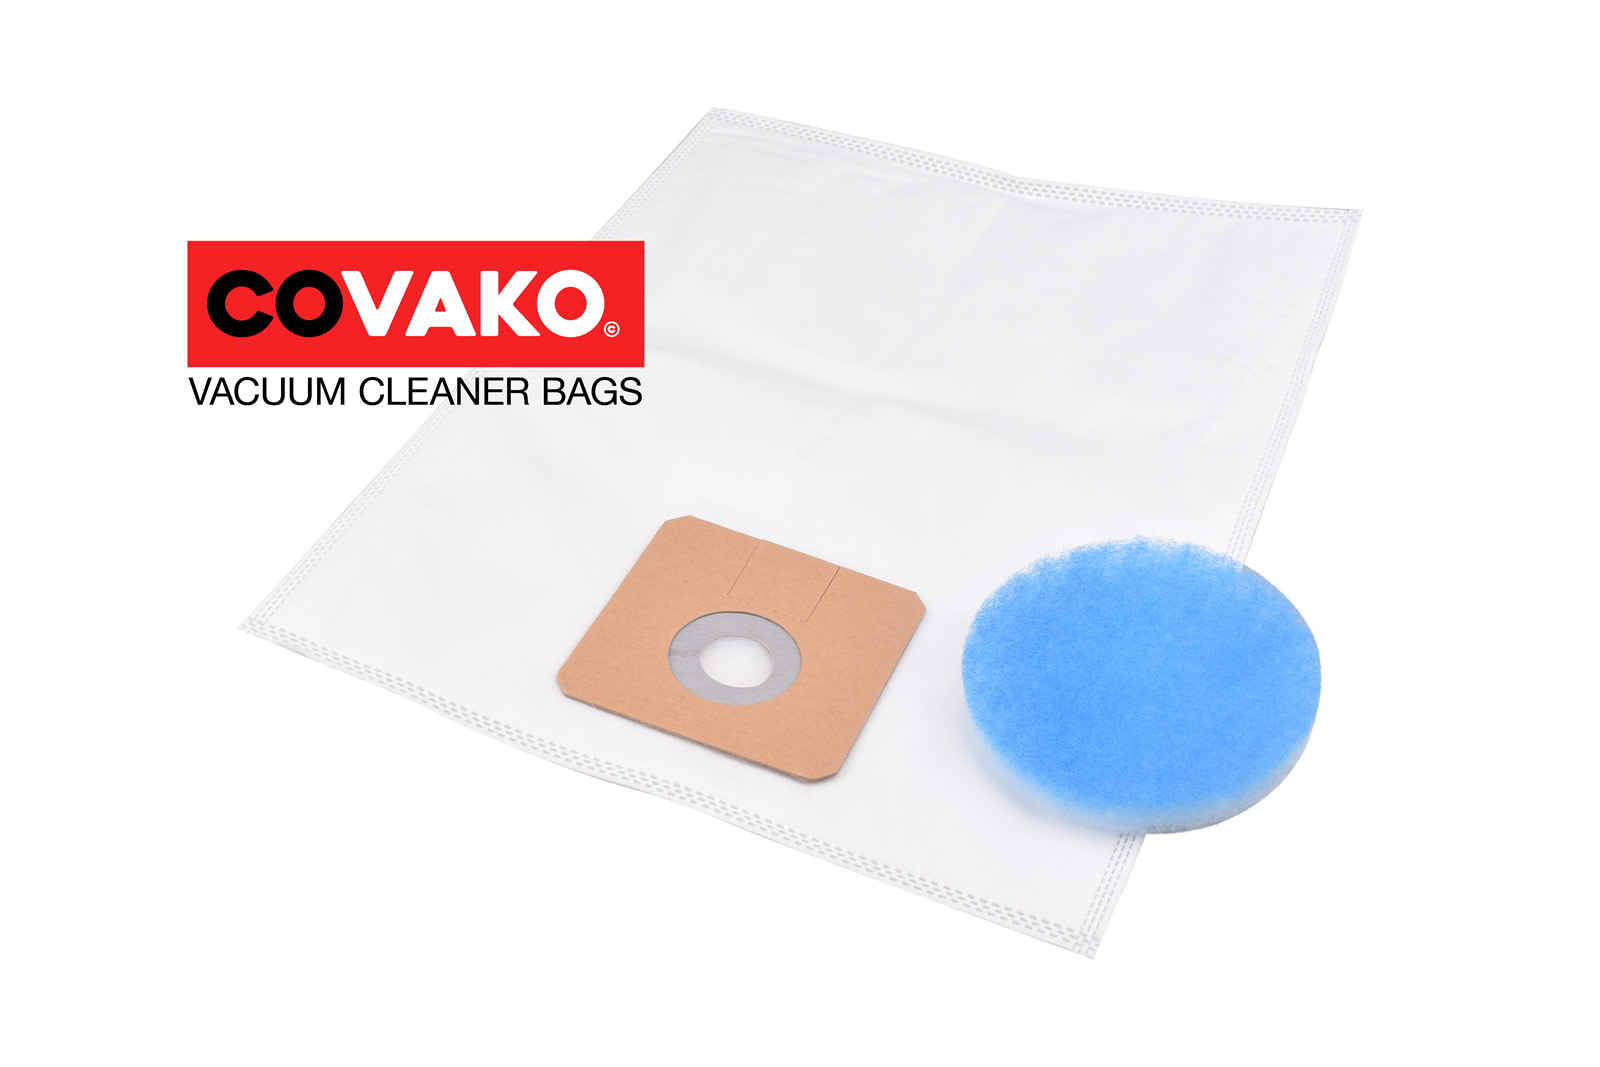 Oehme Otto RS 09 / Synthesis - Oehme Otto vacuum cleaner bags